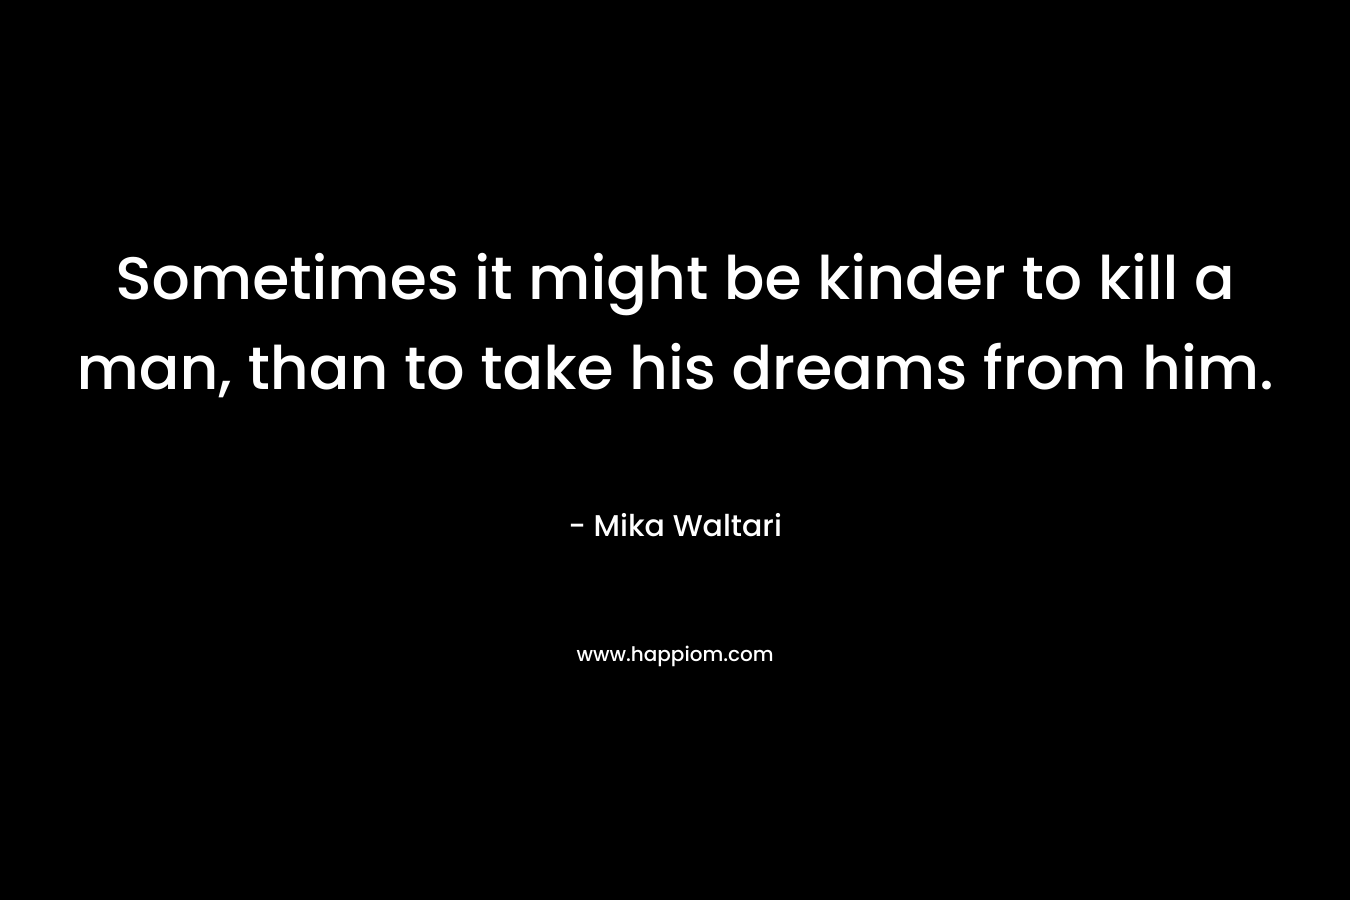 Sometimes it might be kinder to kill a man, than to take his dreams from him.